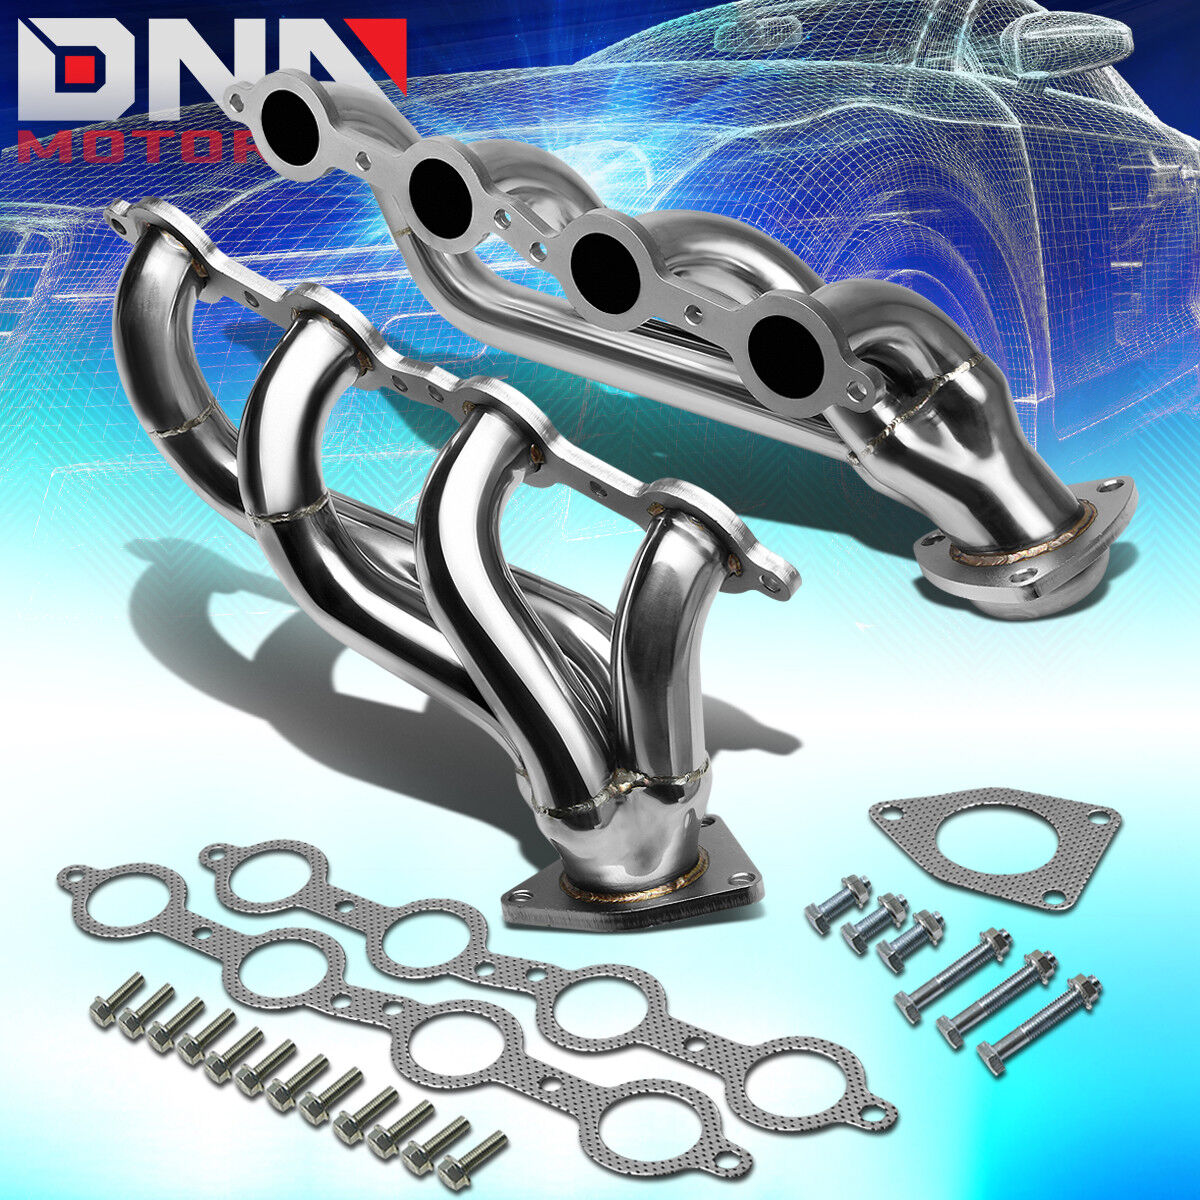 FOR 2002-2016 CHEVY SILVERADO STAINLESS STEEL RACING EXHAUST HEADER MANIFOLD